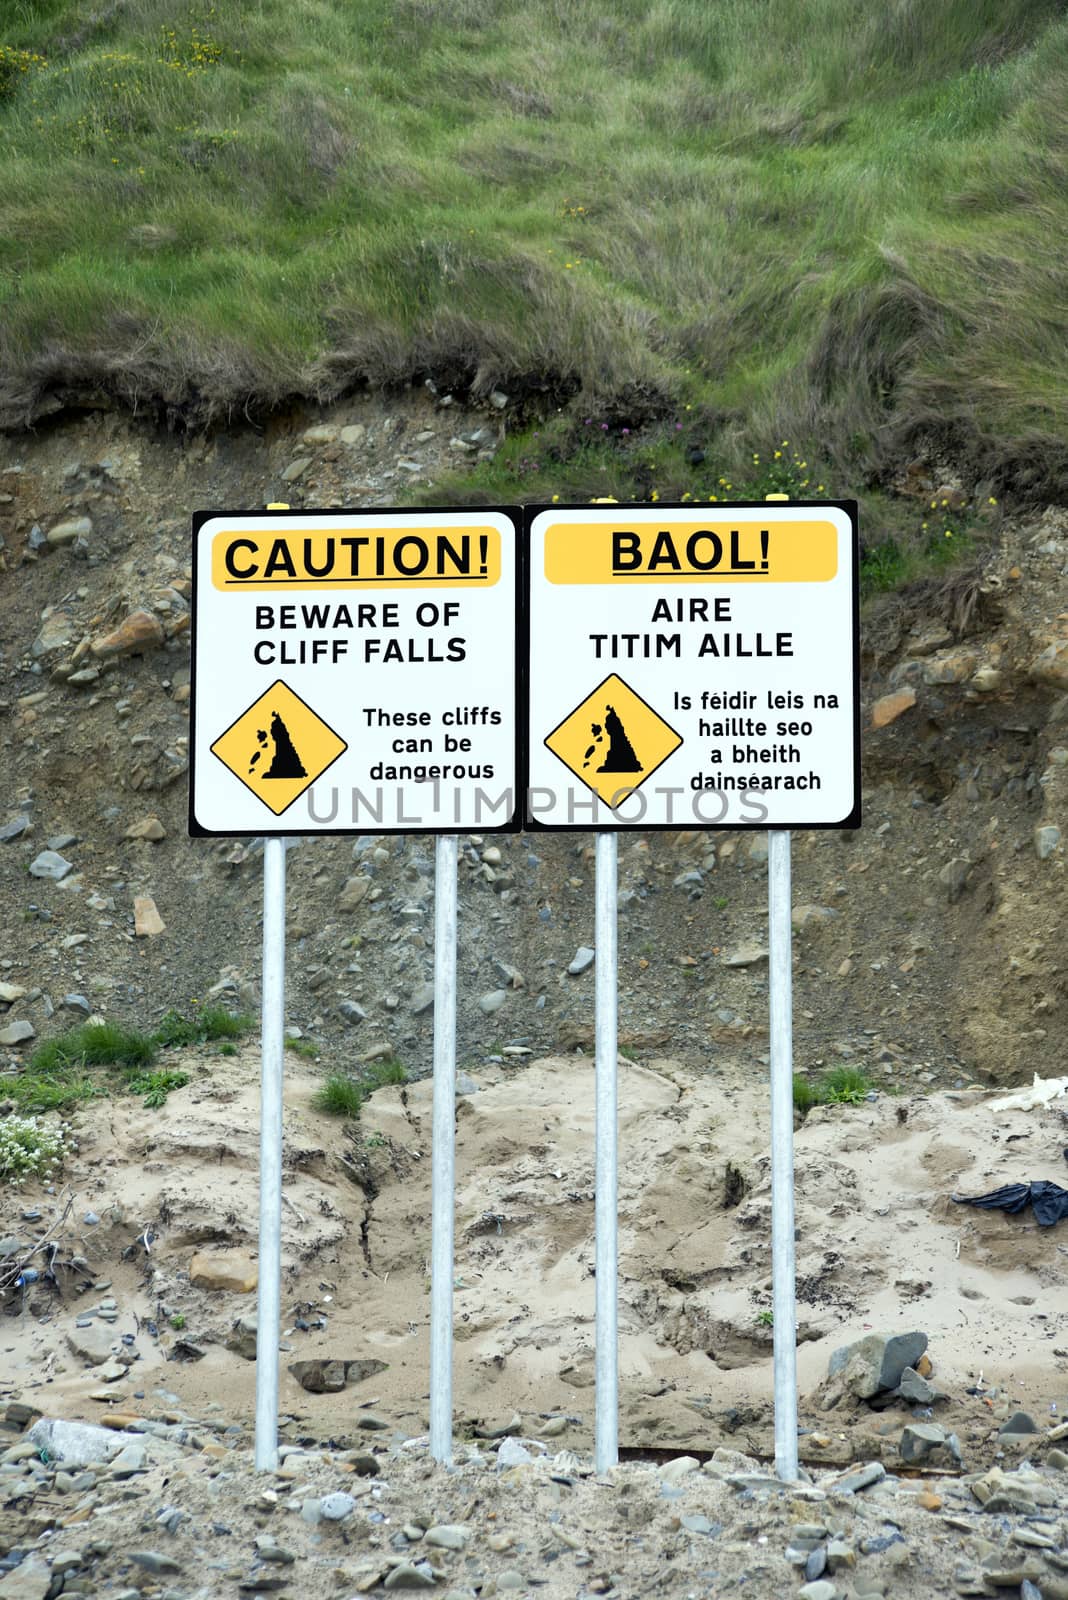 beware of cliff falls signs by morrbyte